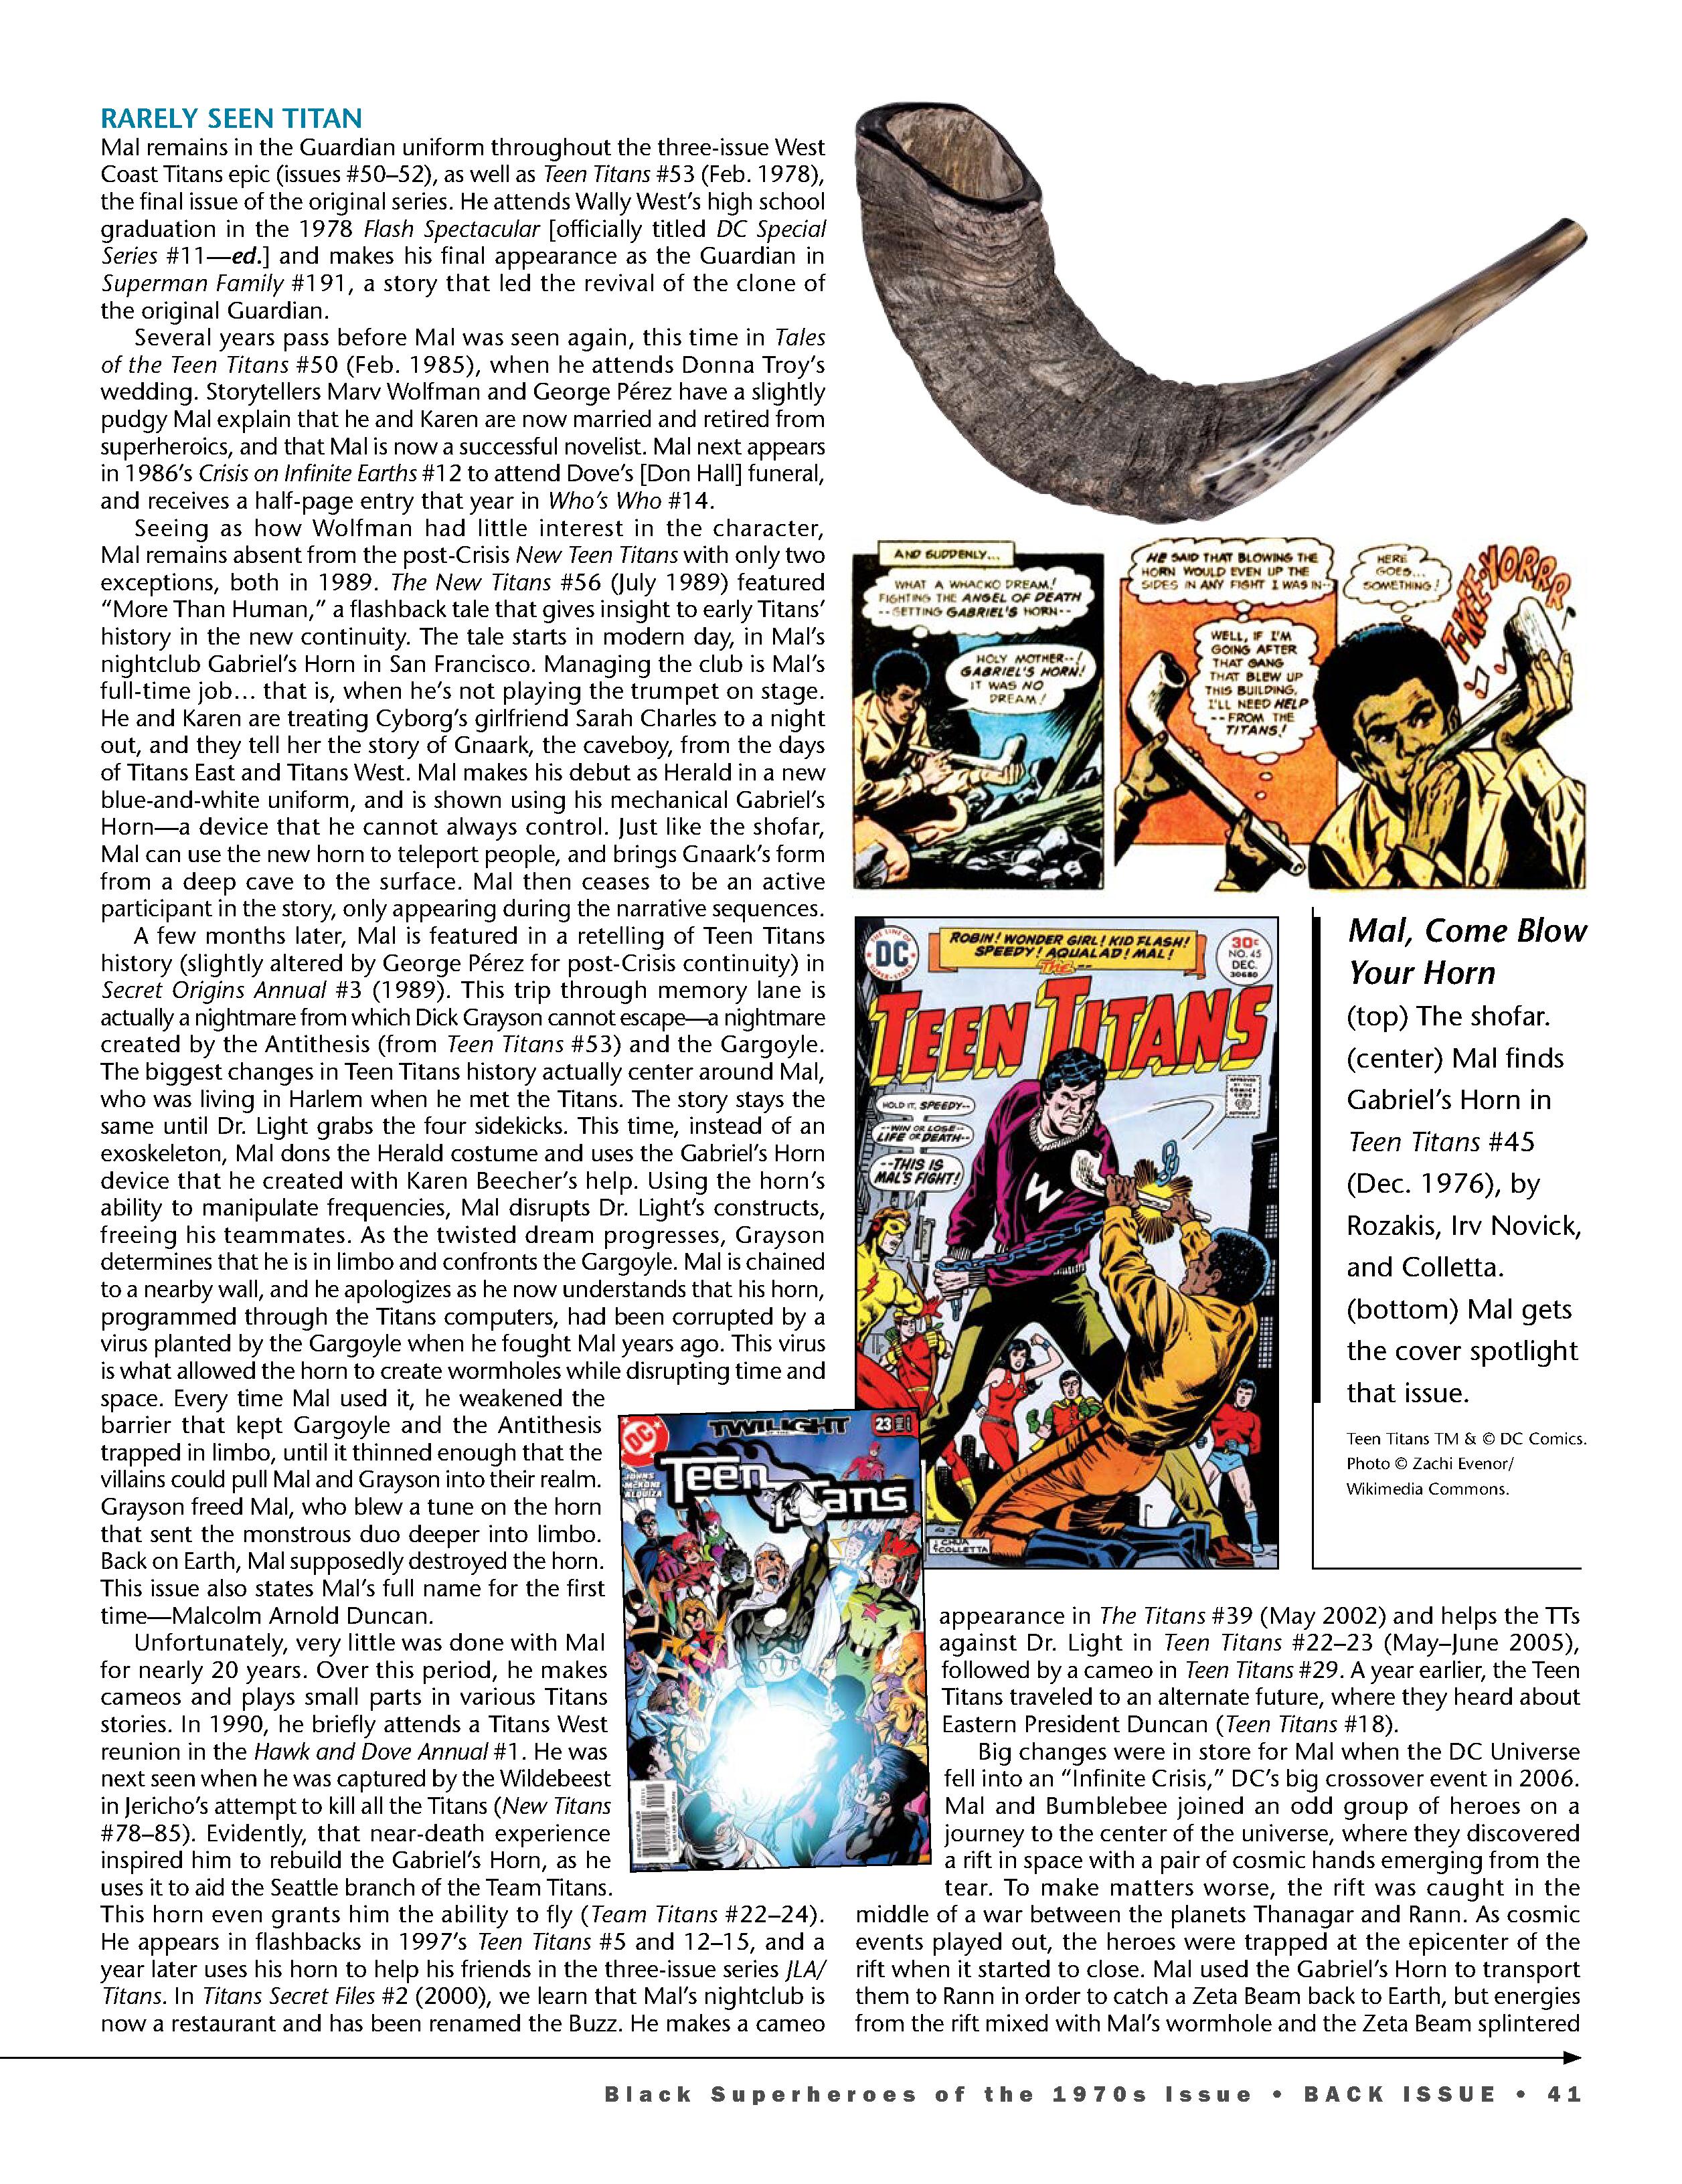 Read online Back Issue comic -  Issue #114 - 43